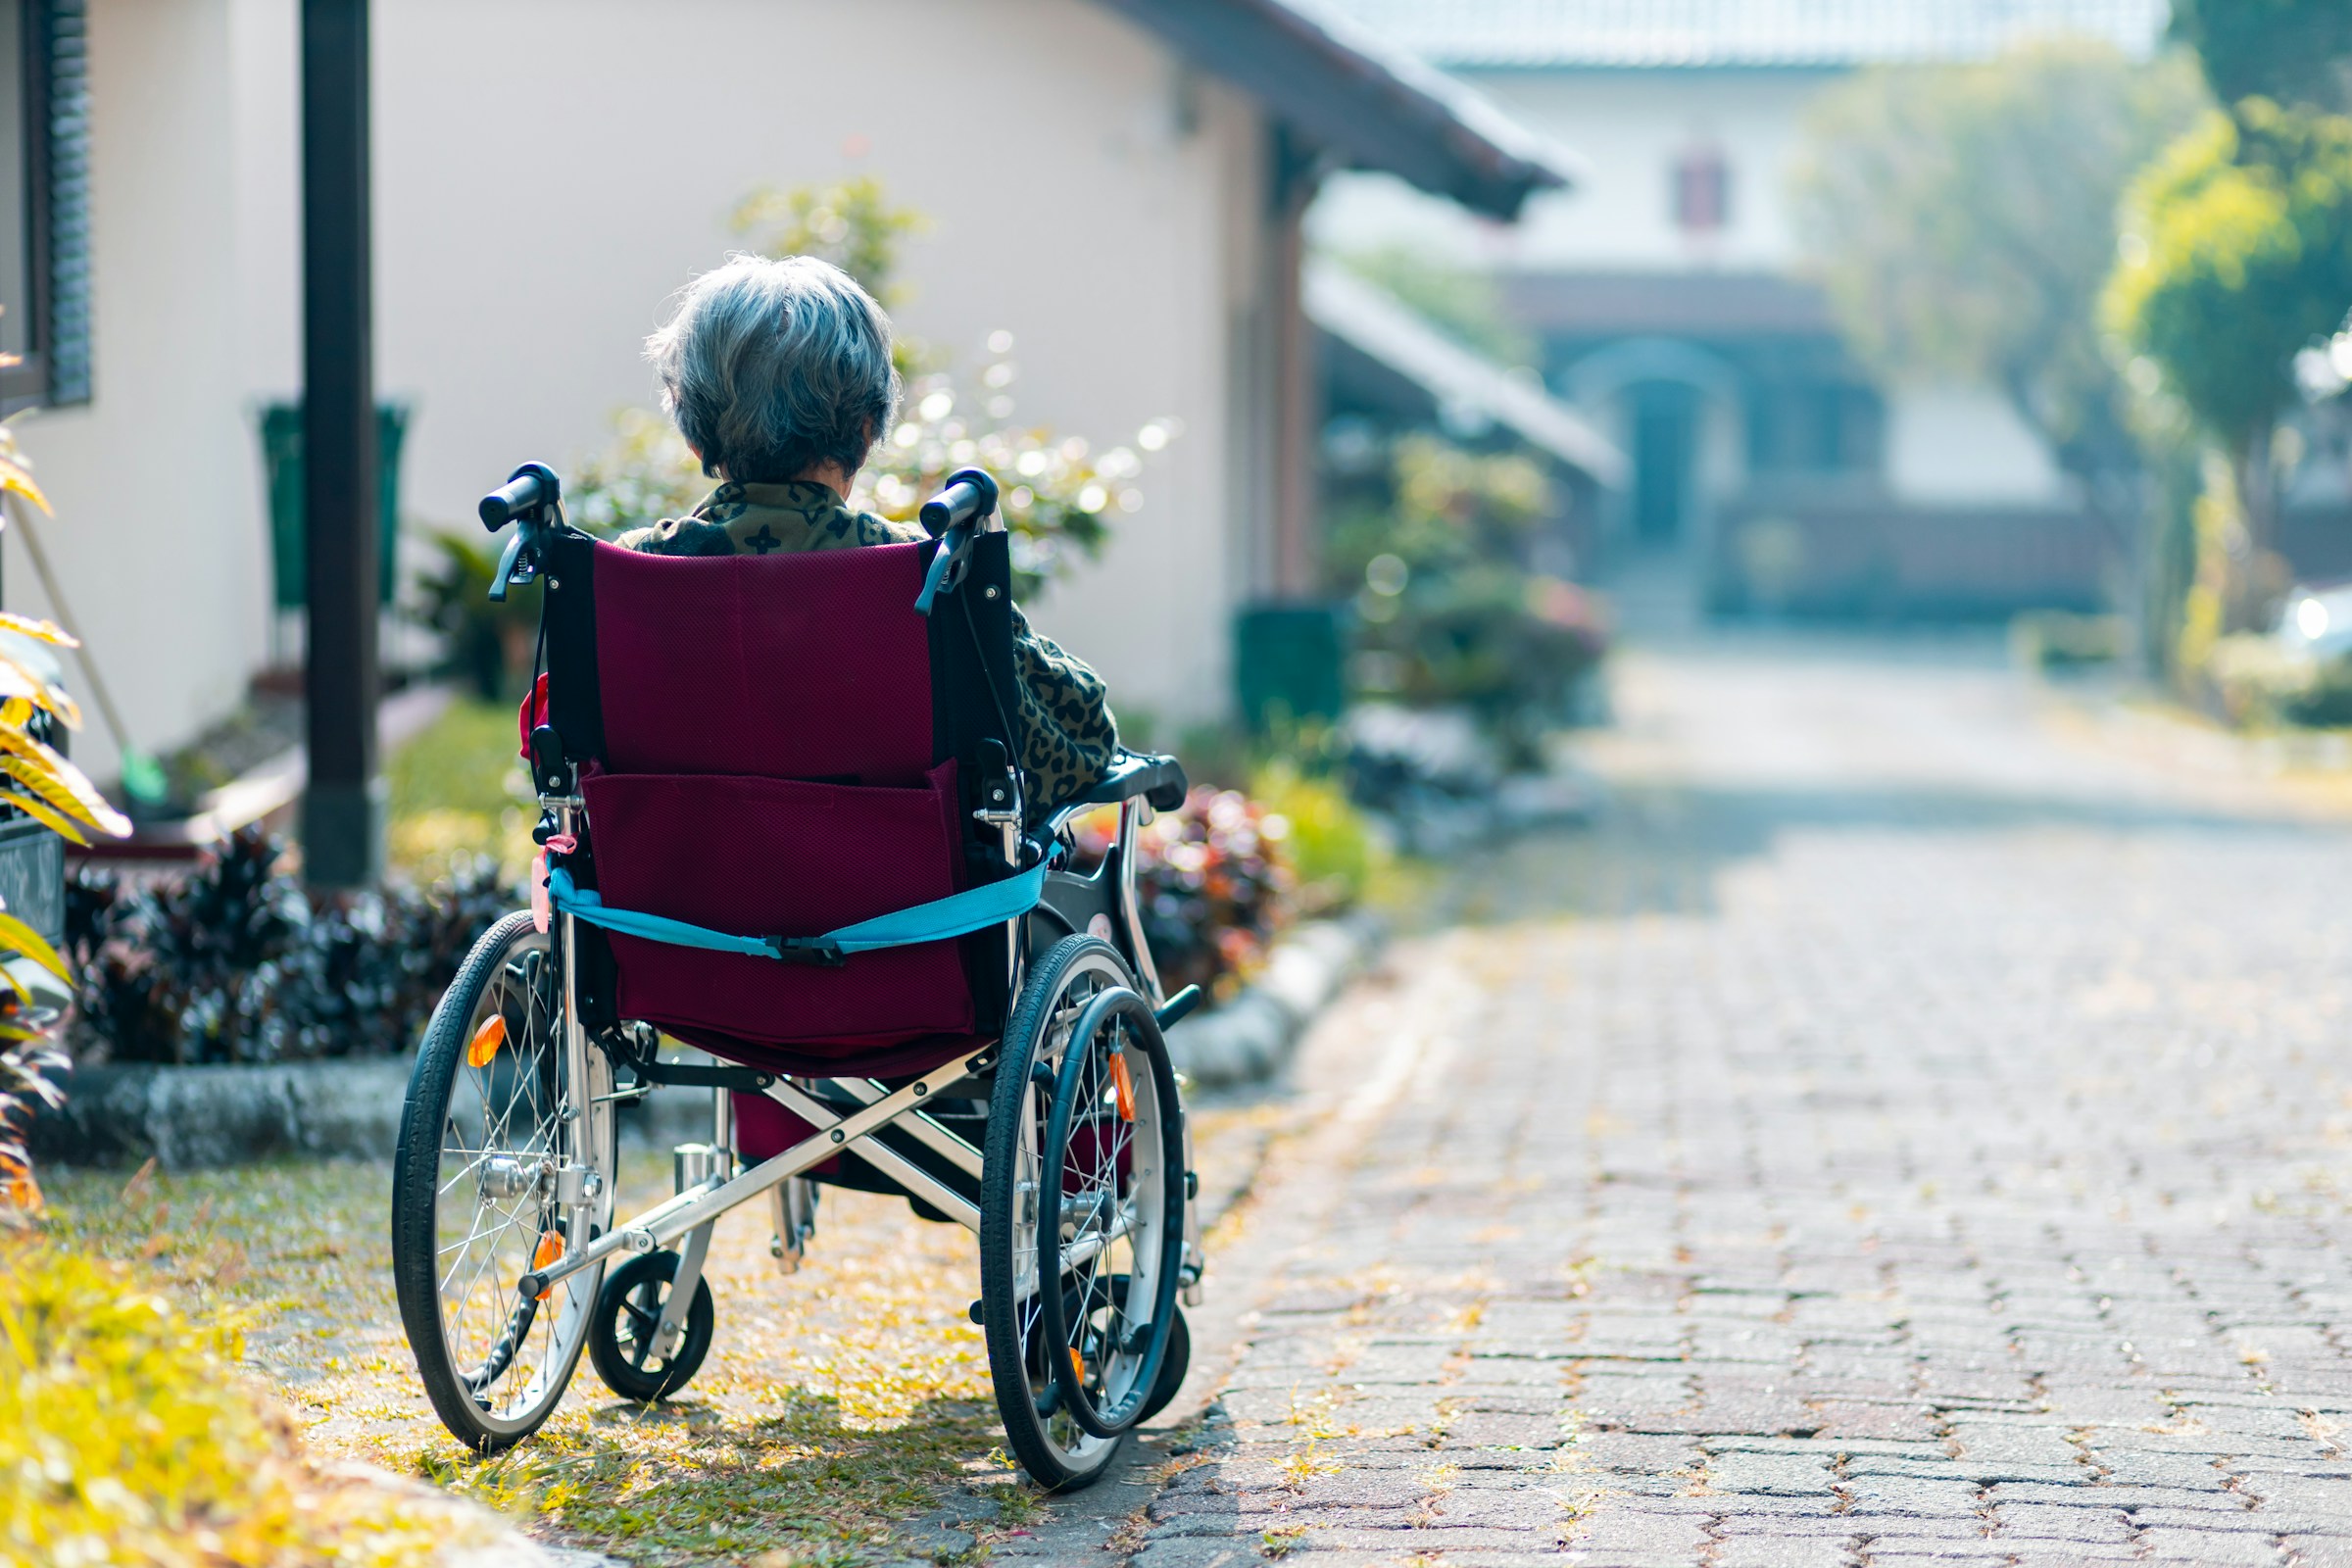 An elderly woman sits in a wheelchair on a cobblestone road. A few houses and structures are seen surrounding her.